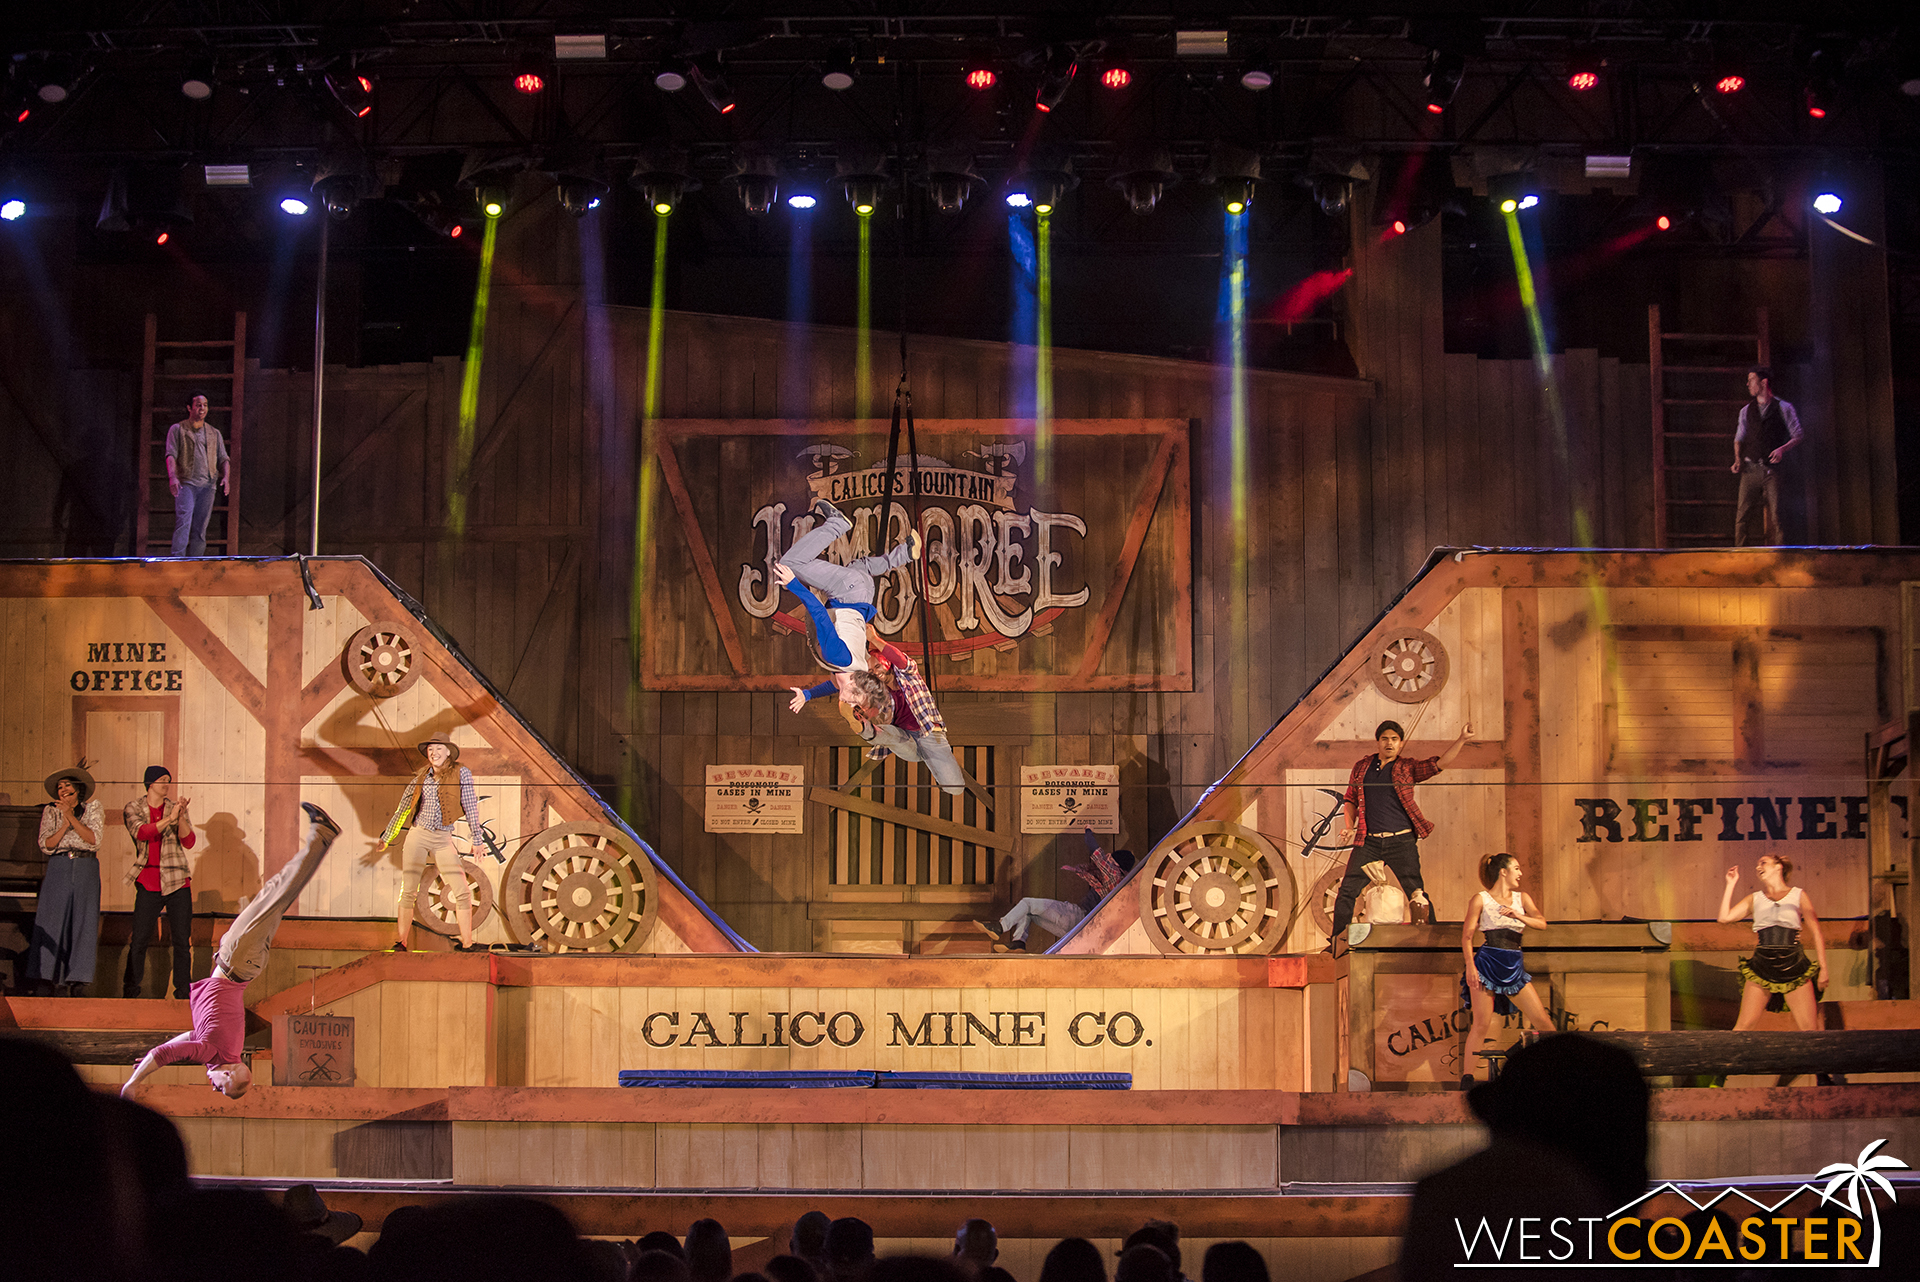  It’s honestly a pretty cool show—a mashup of genres and gymnastics for a contemporary take of the park’s classic summer stunt show concept. 